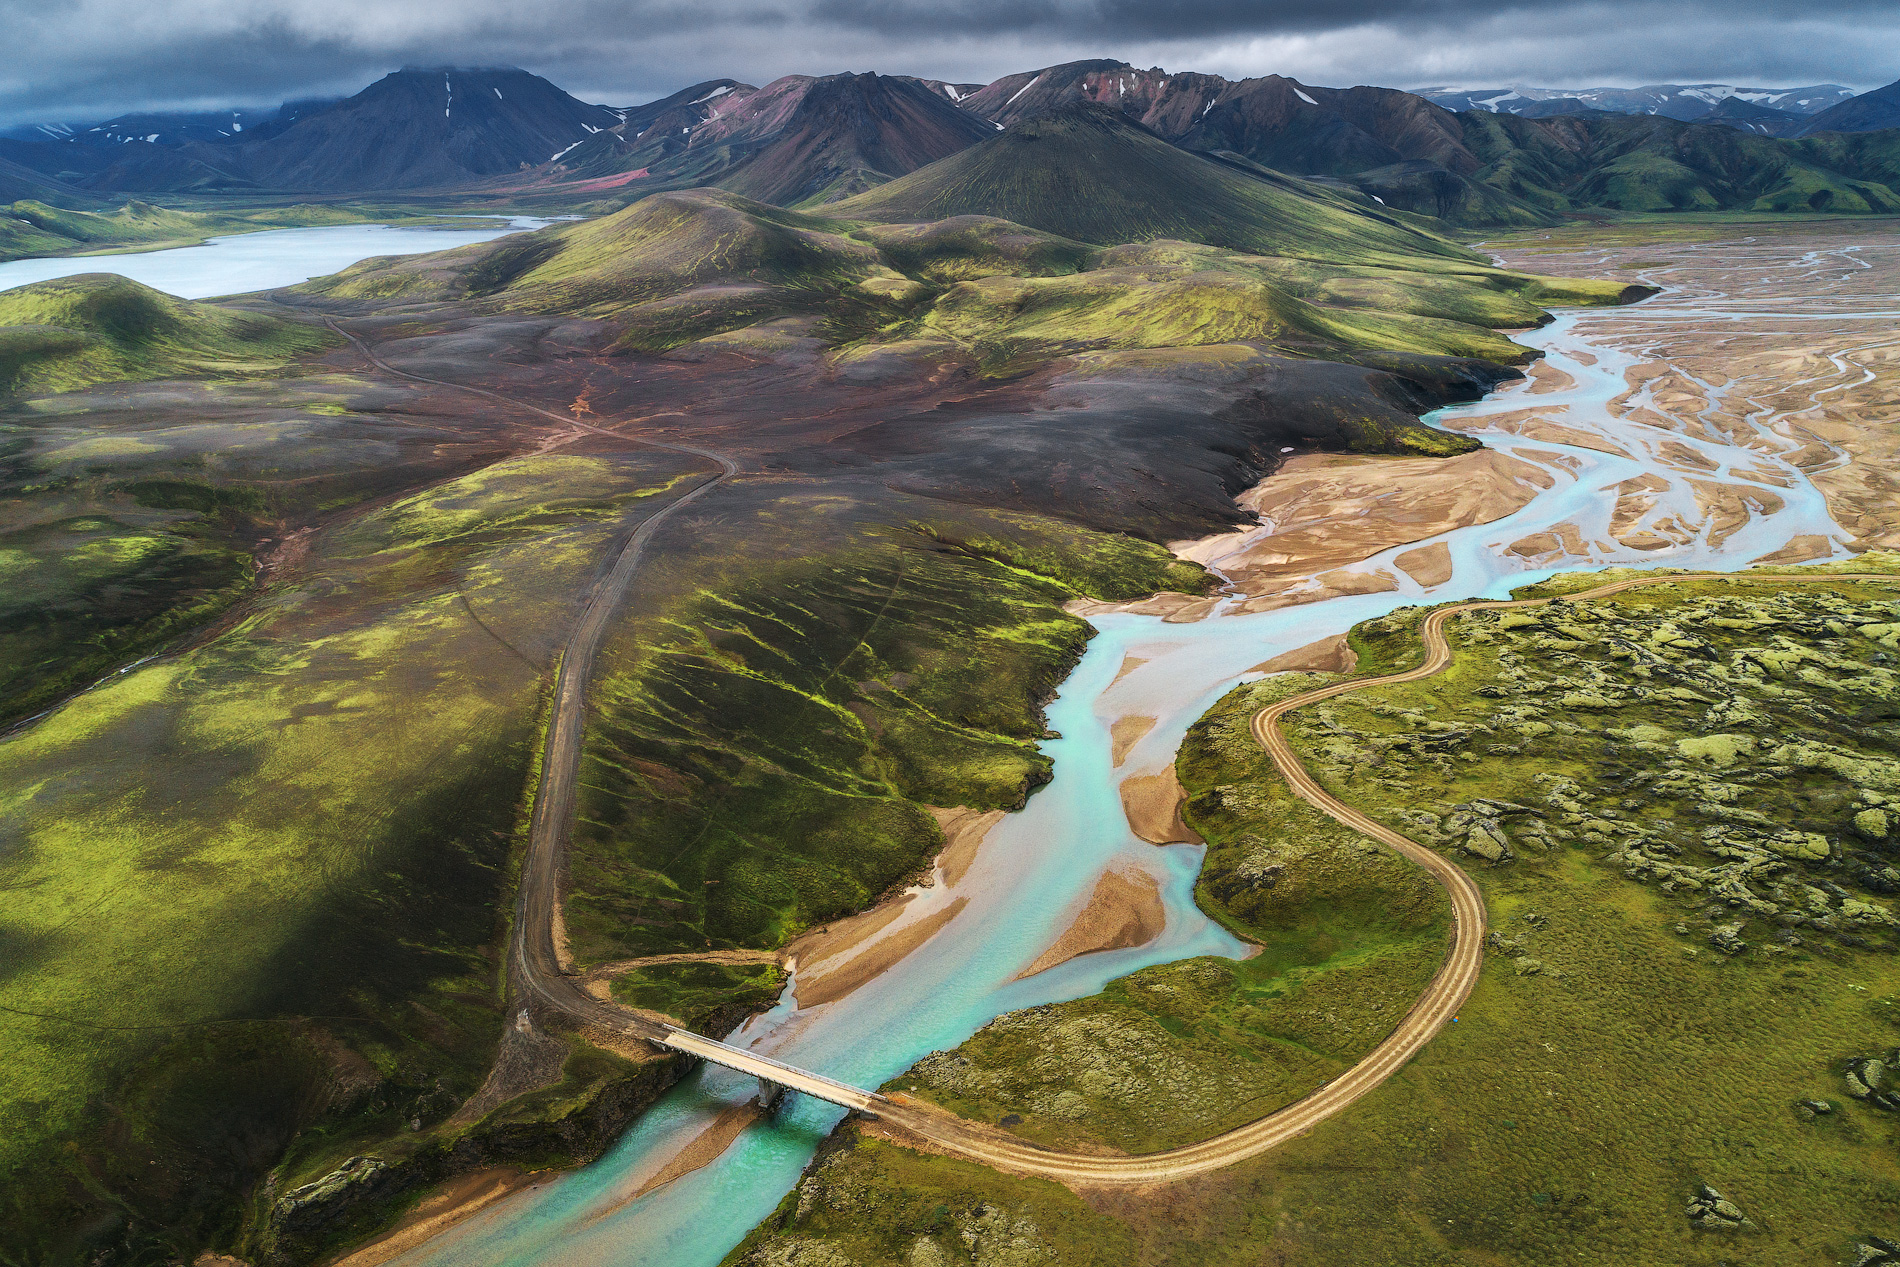 A clear view of the Icelandic Highlands from above.